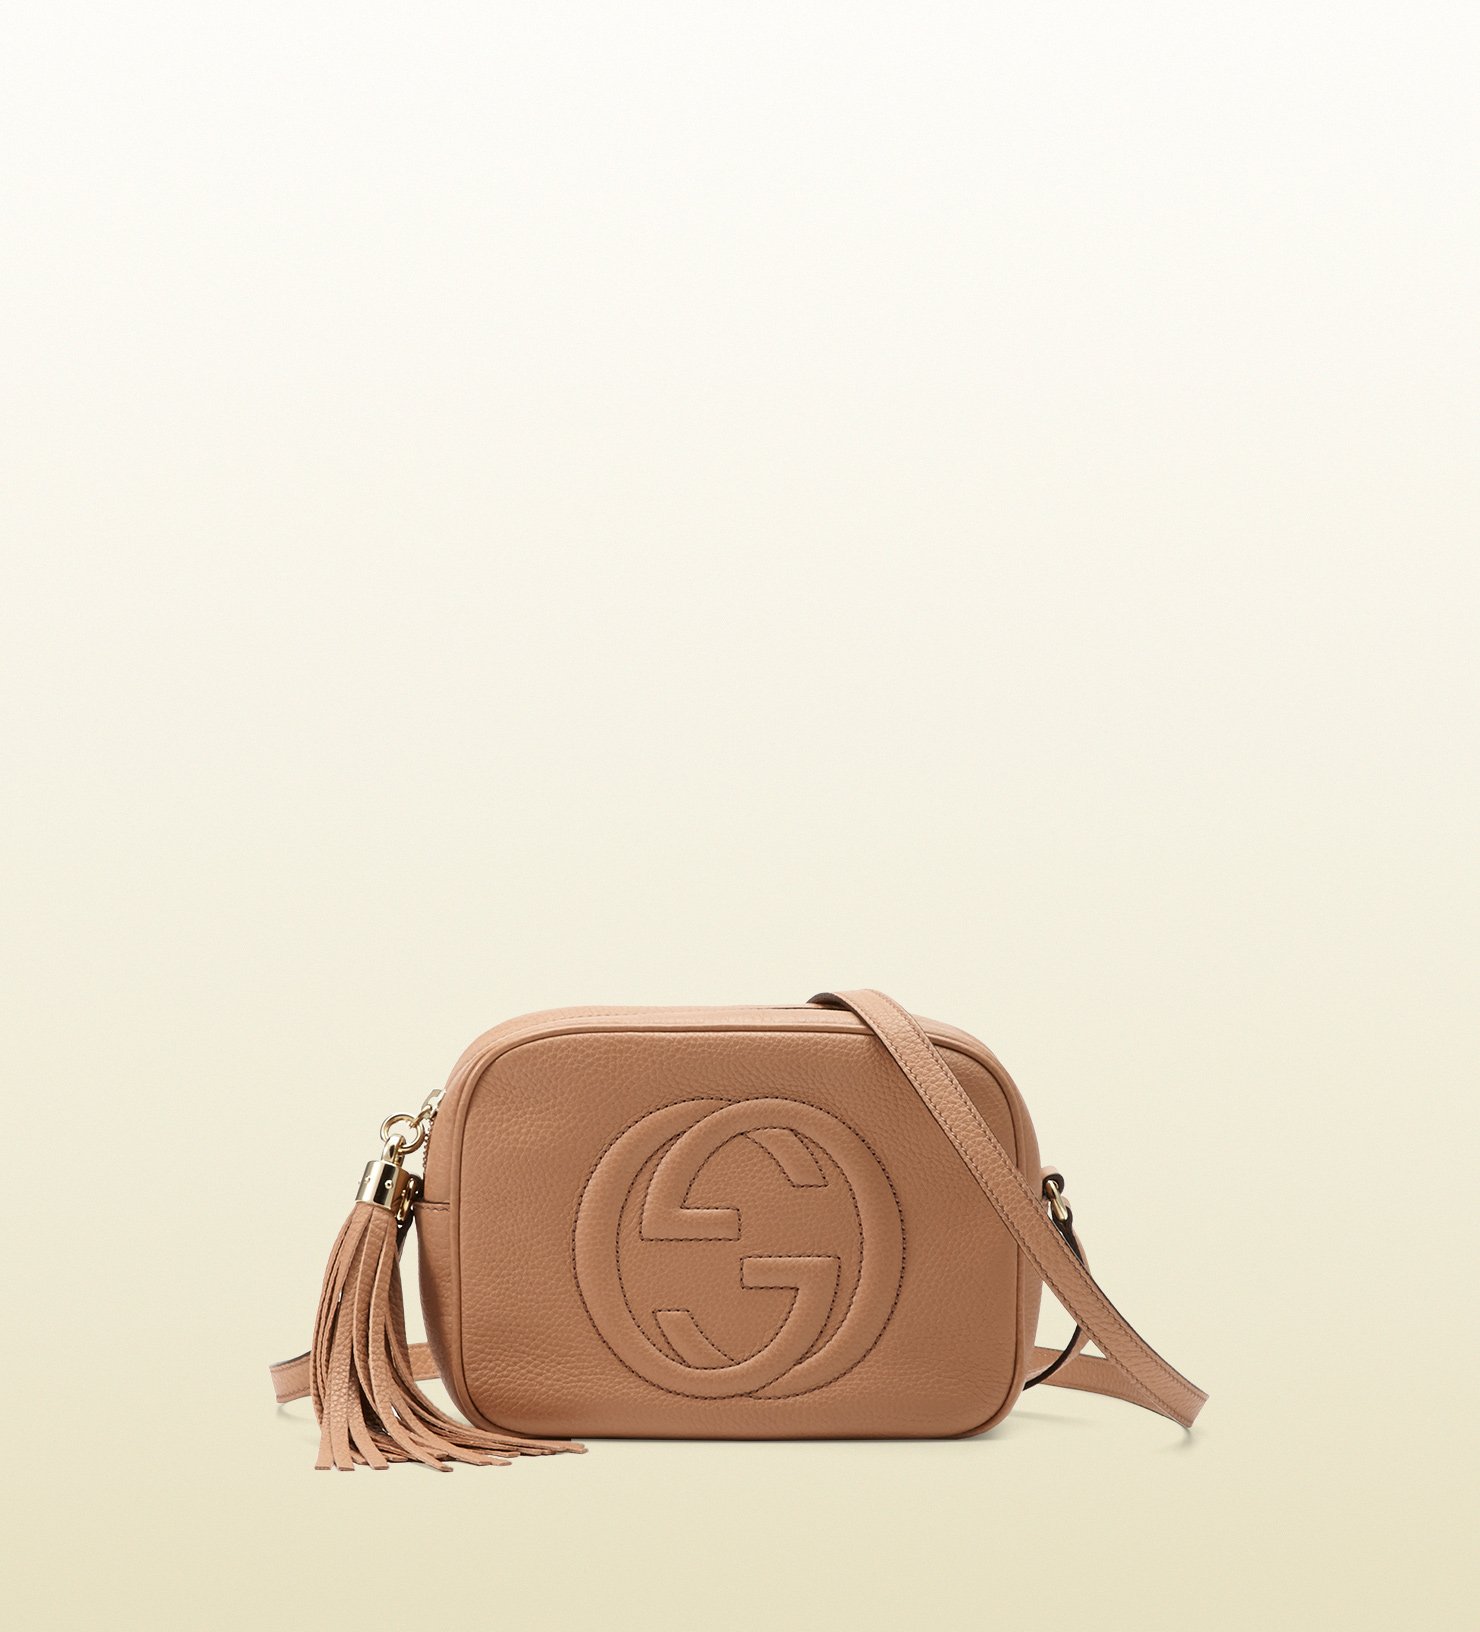 Gucci Soho Leather Disco Bag in Natural | Lyst